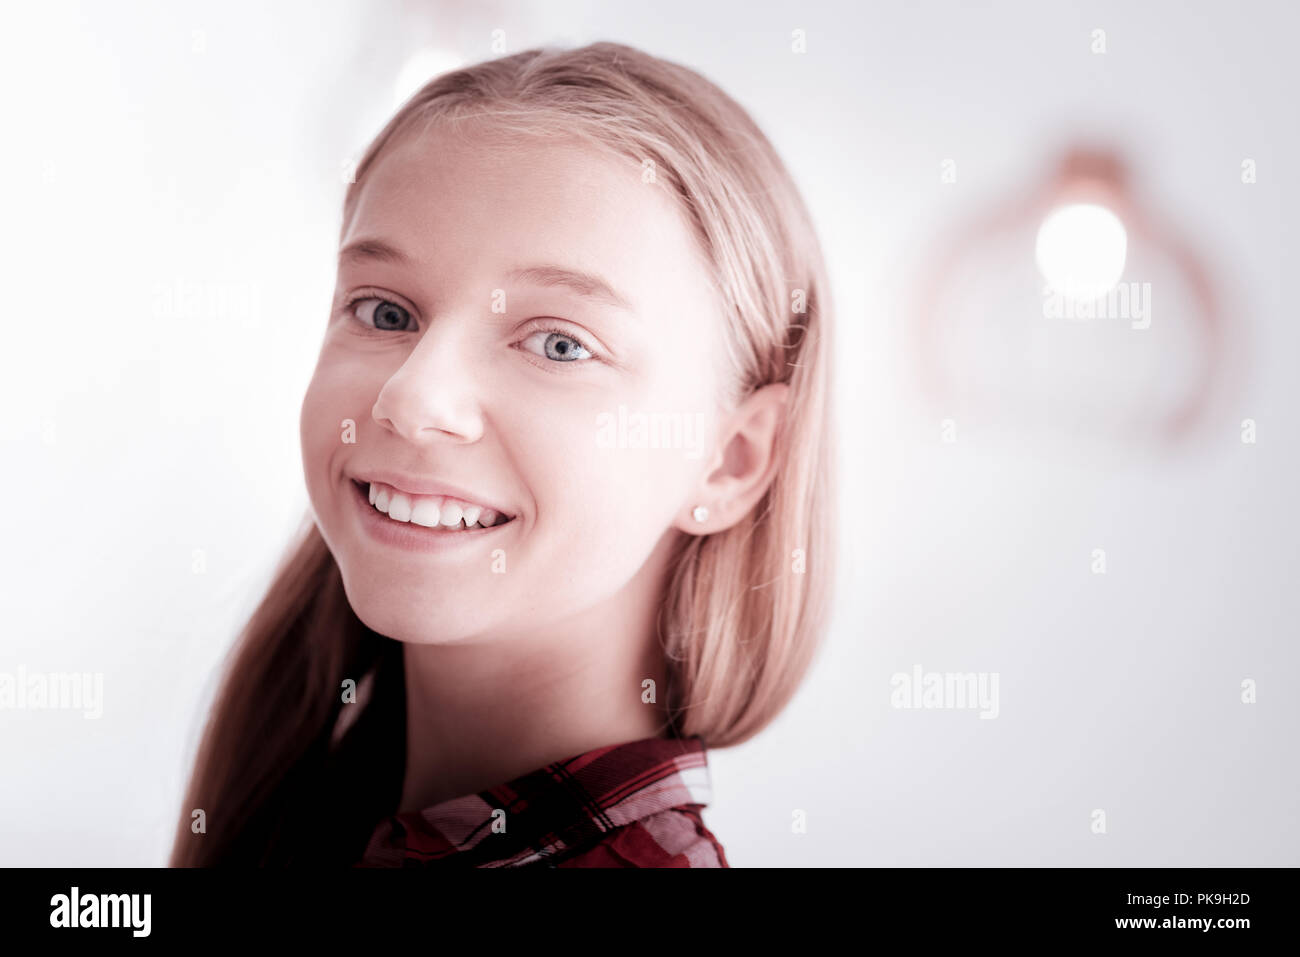 Lovely teenage girl being in a wonderful mood and smiling happily Stock Photo